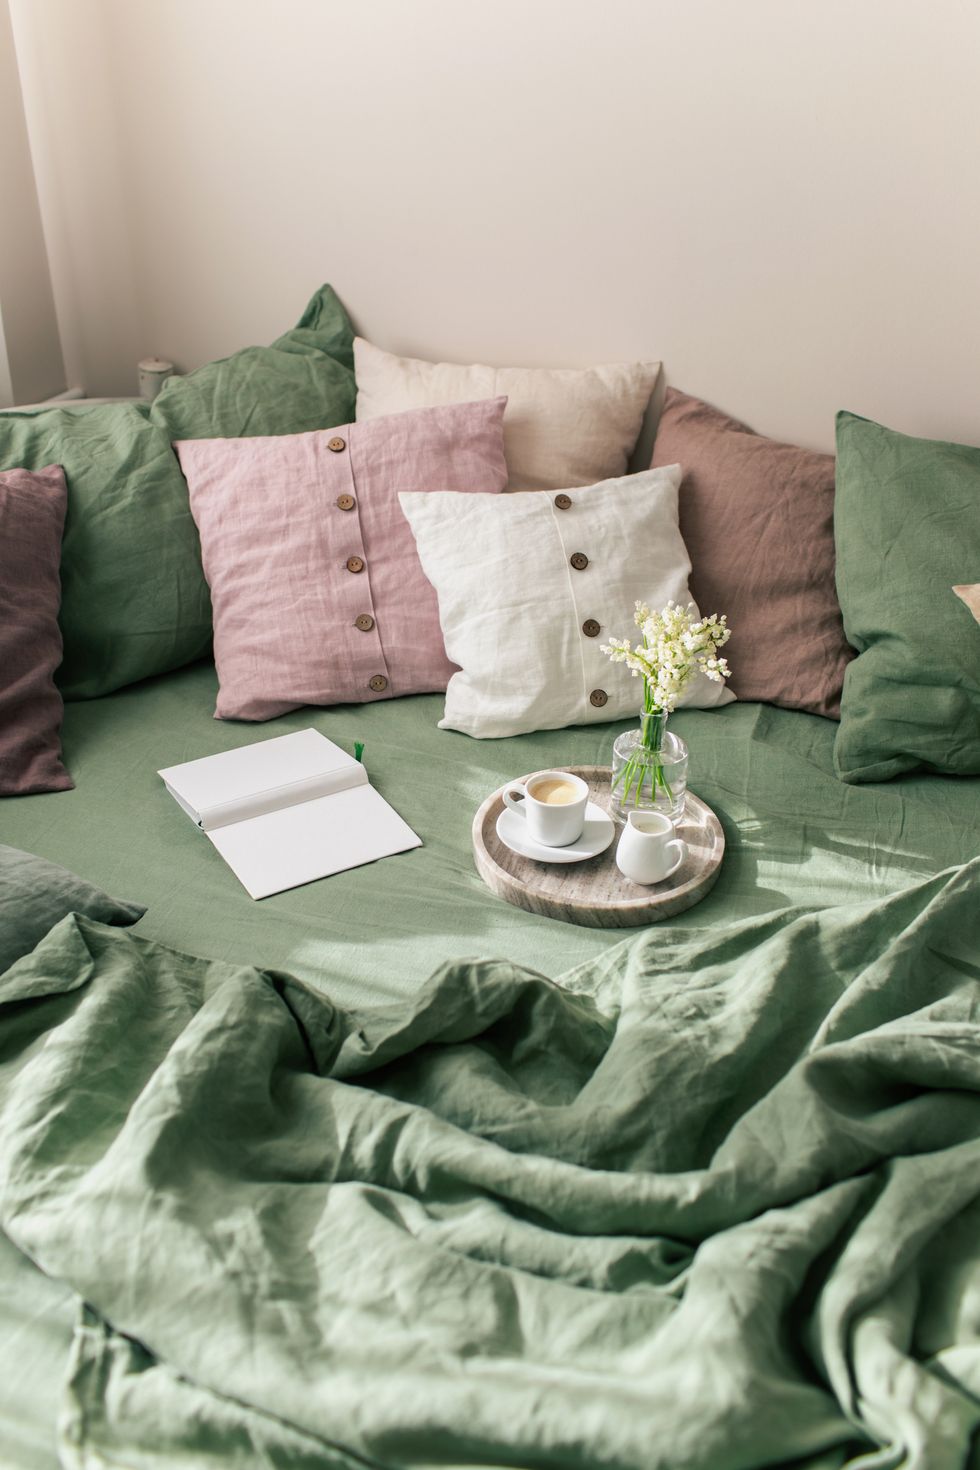 36 Cozy Earthy Bedroom Decor Ideas That Will Make You Want To Cuddle Up &  Relax